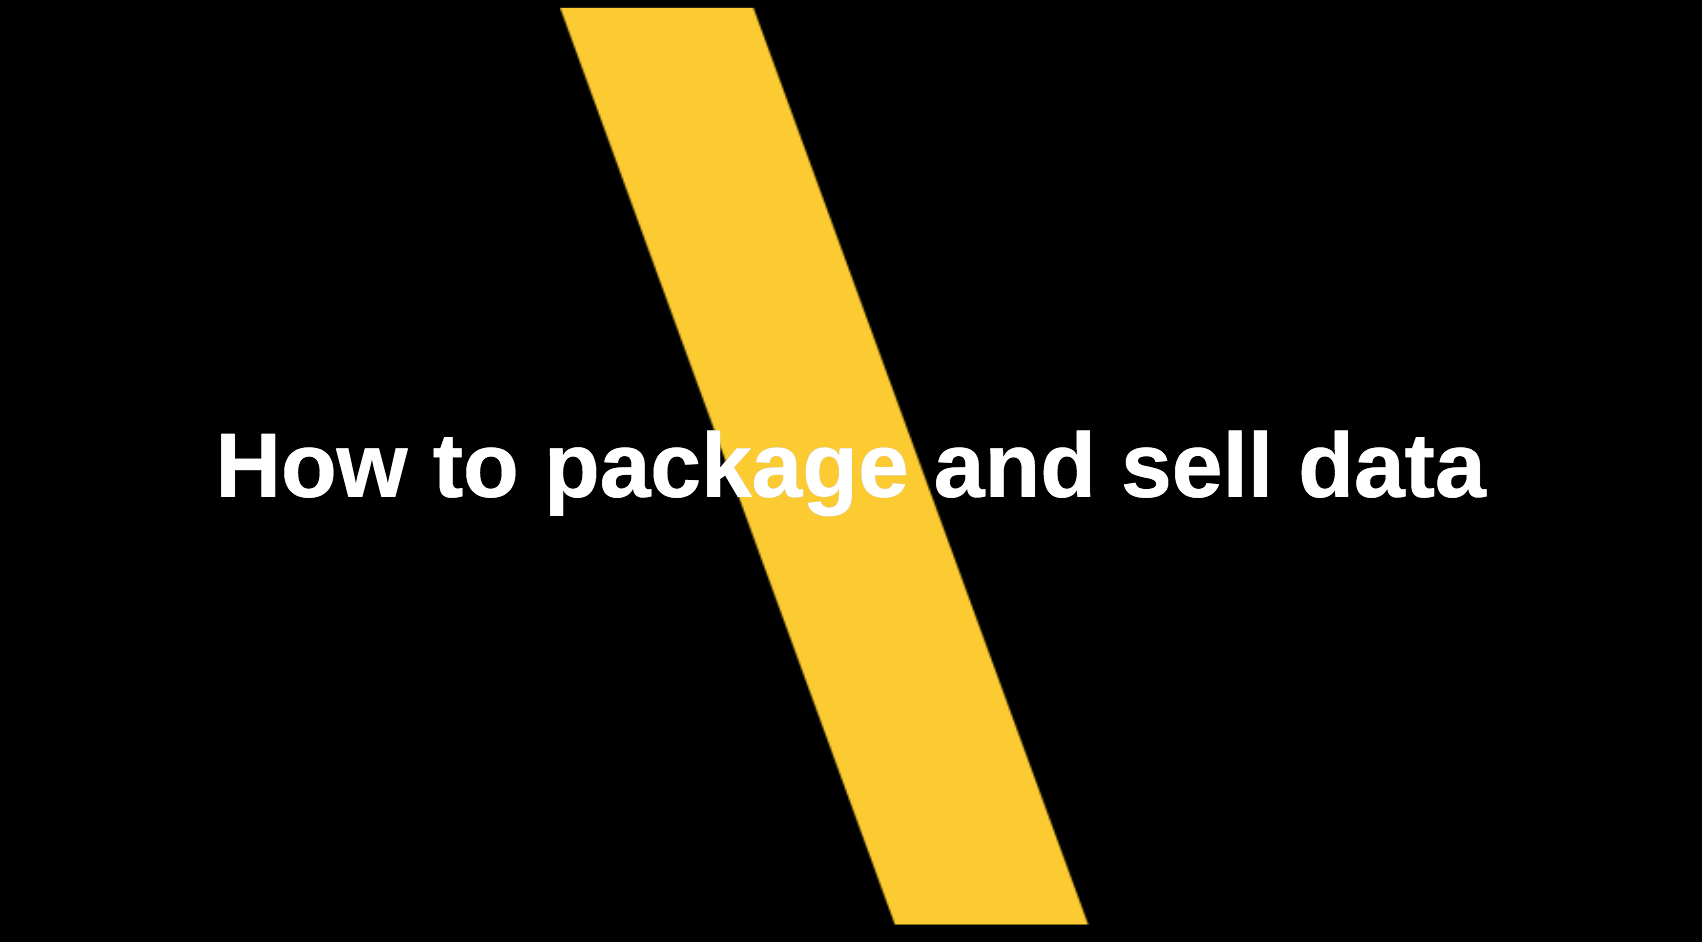 How to package and sell data